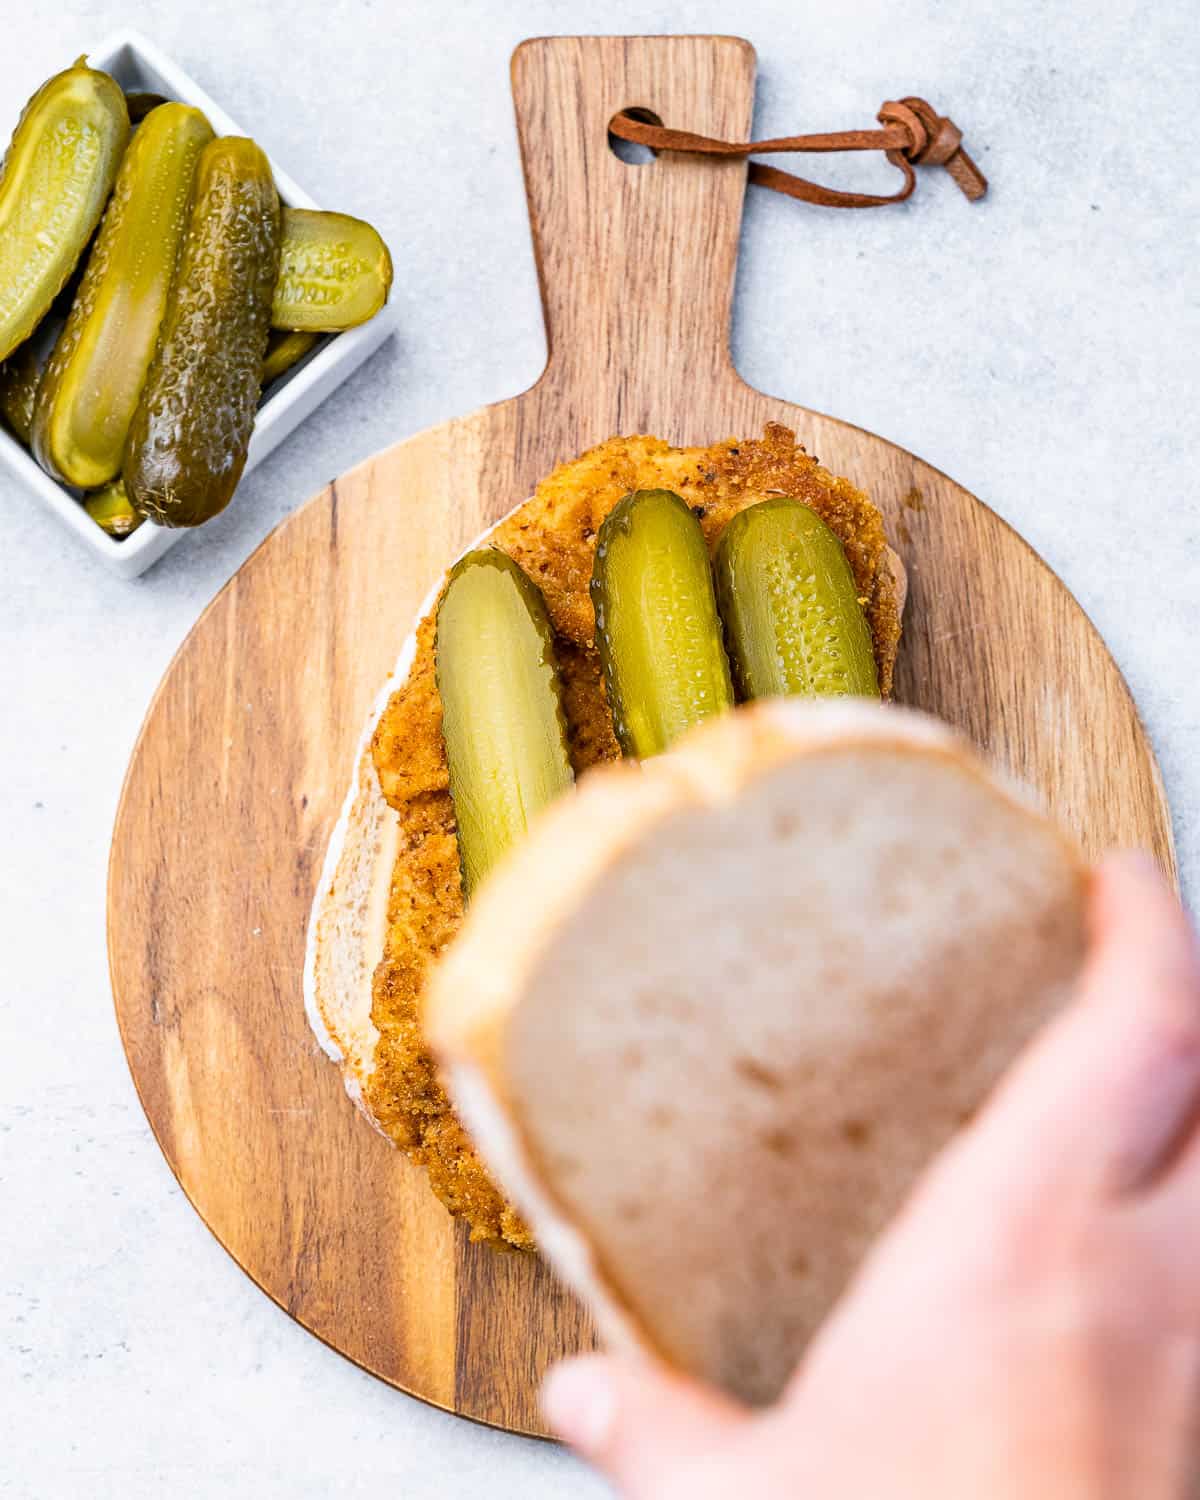 Assembling a sandwich with chicken and pickles.